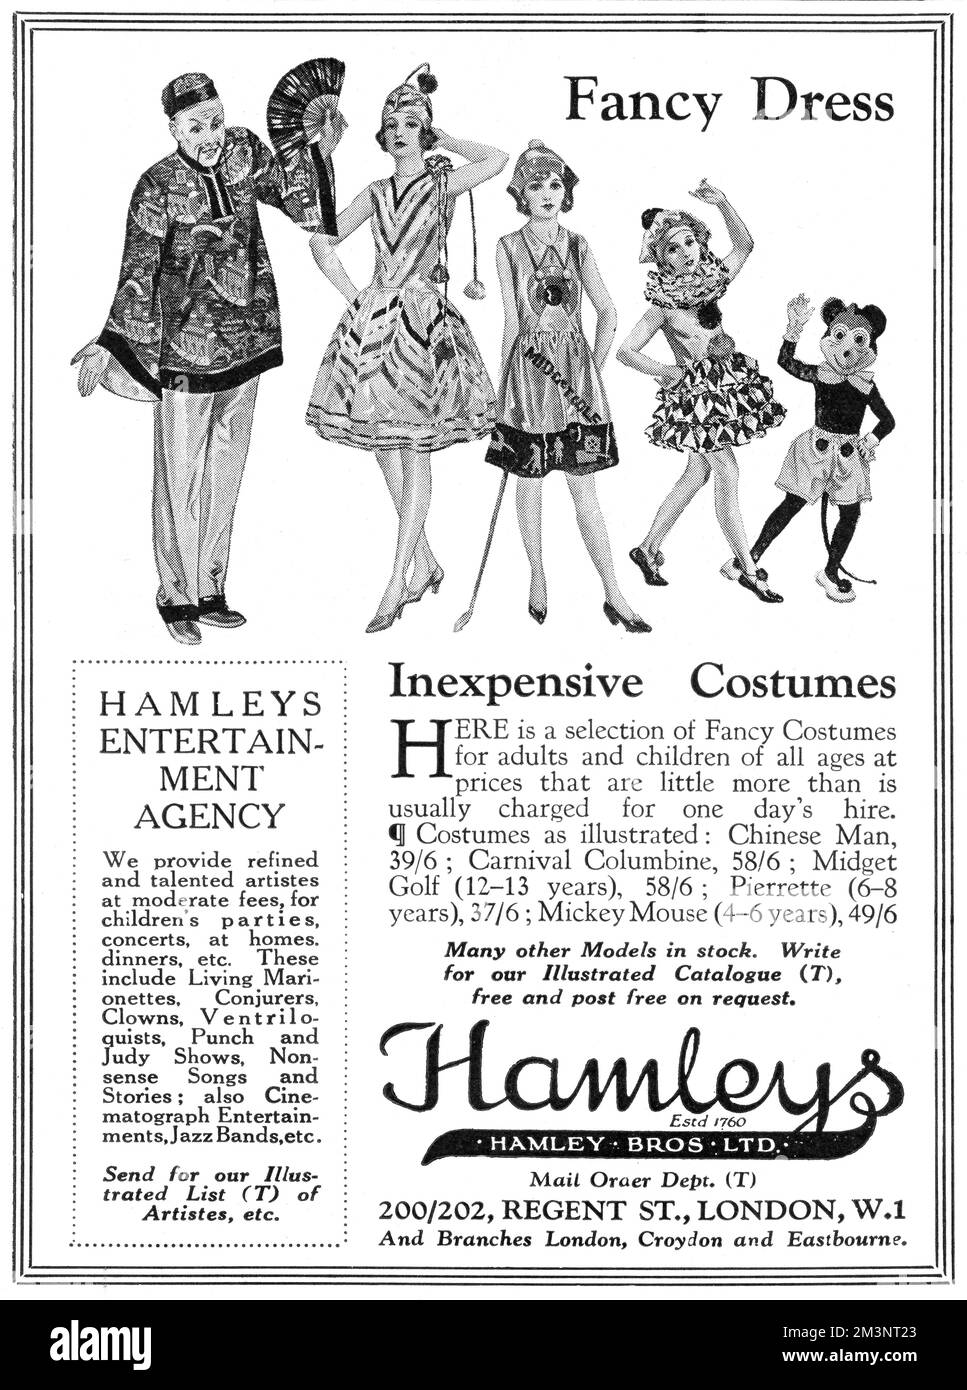 Advertisement for inexpensive fancy dress costumes available from Hamleys world-famous toy shop on Regent Street, London.  Featured costumes include a Chinaman, 'minature golf' and Micky Mouse.     Date: 1930 Stock Photo